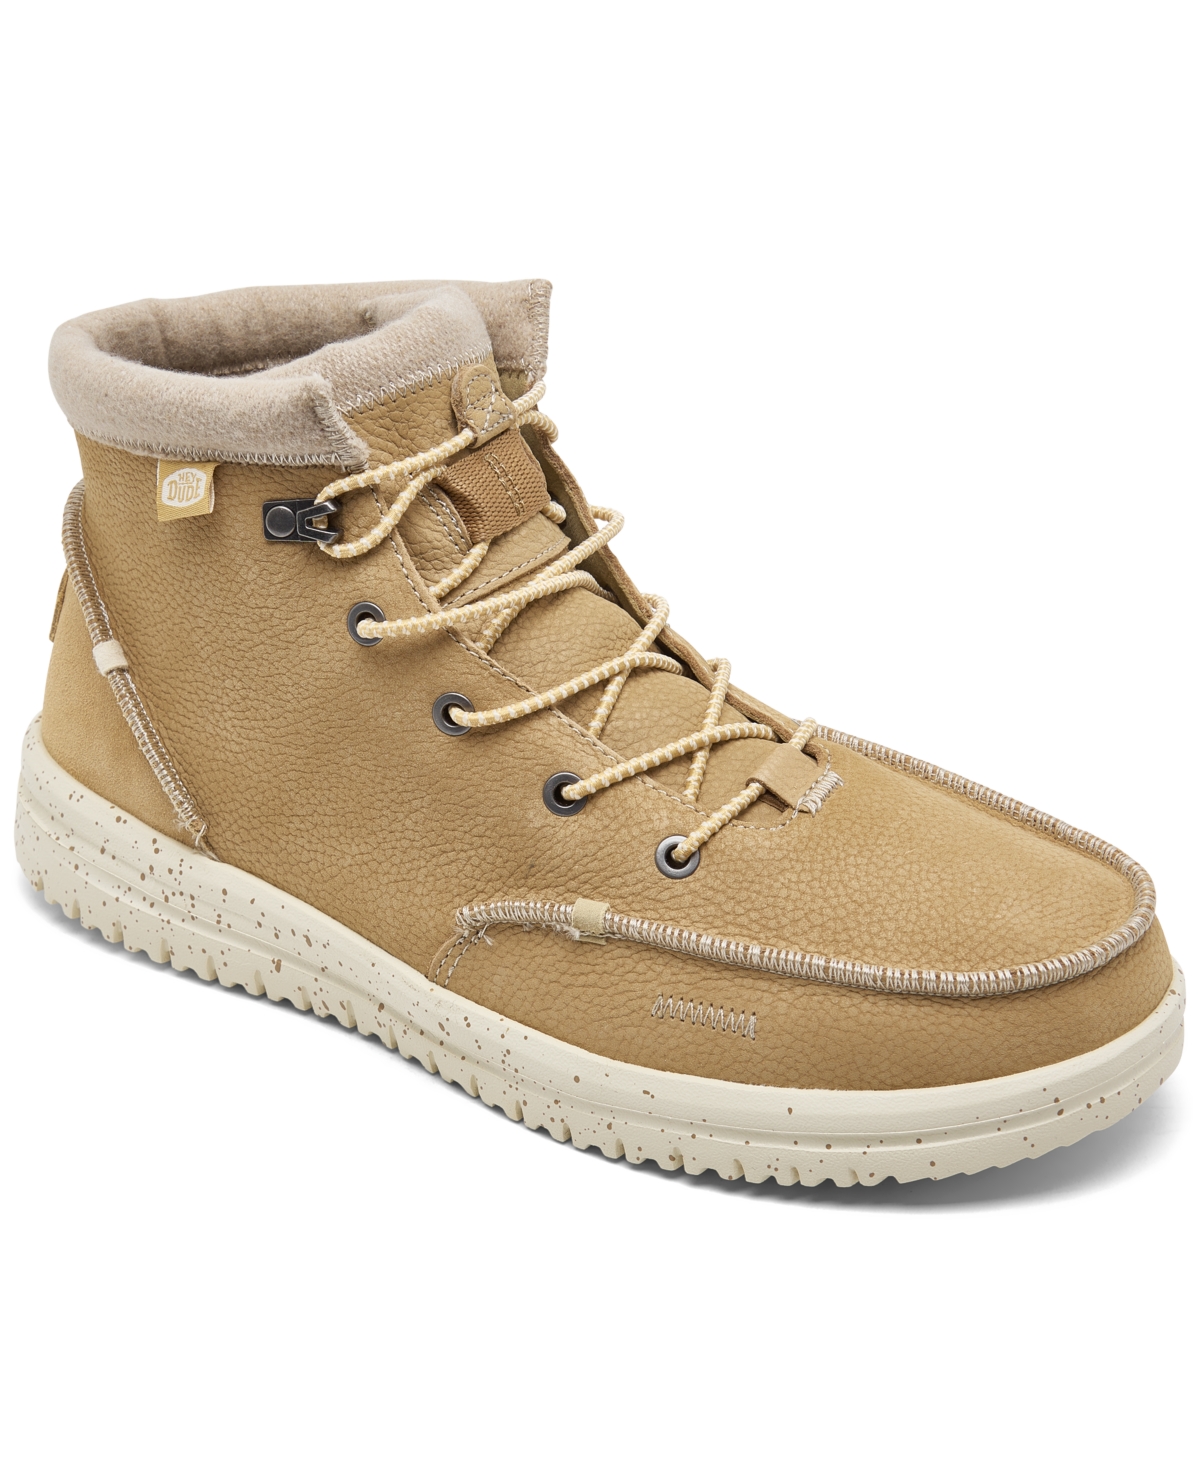 Men's Bradley Leather Casual Boots from Finish Line - Wheat